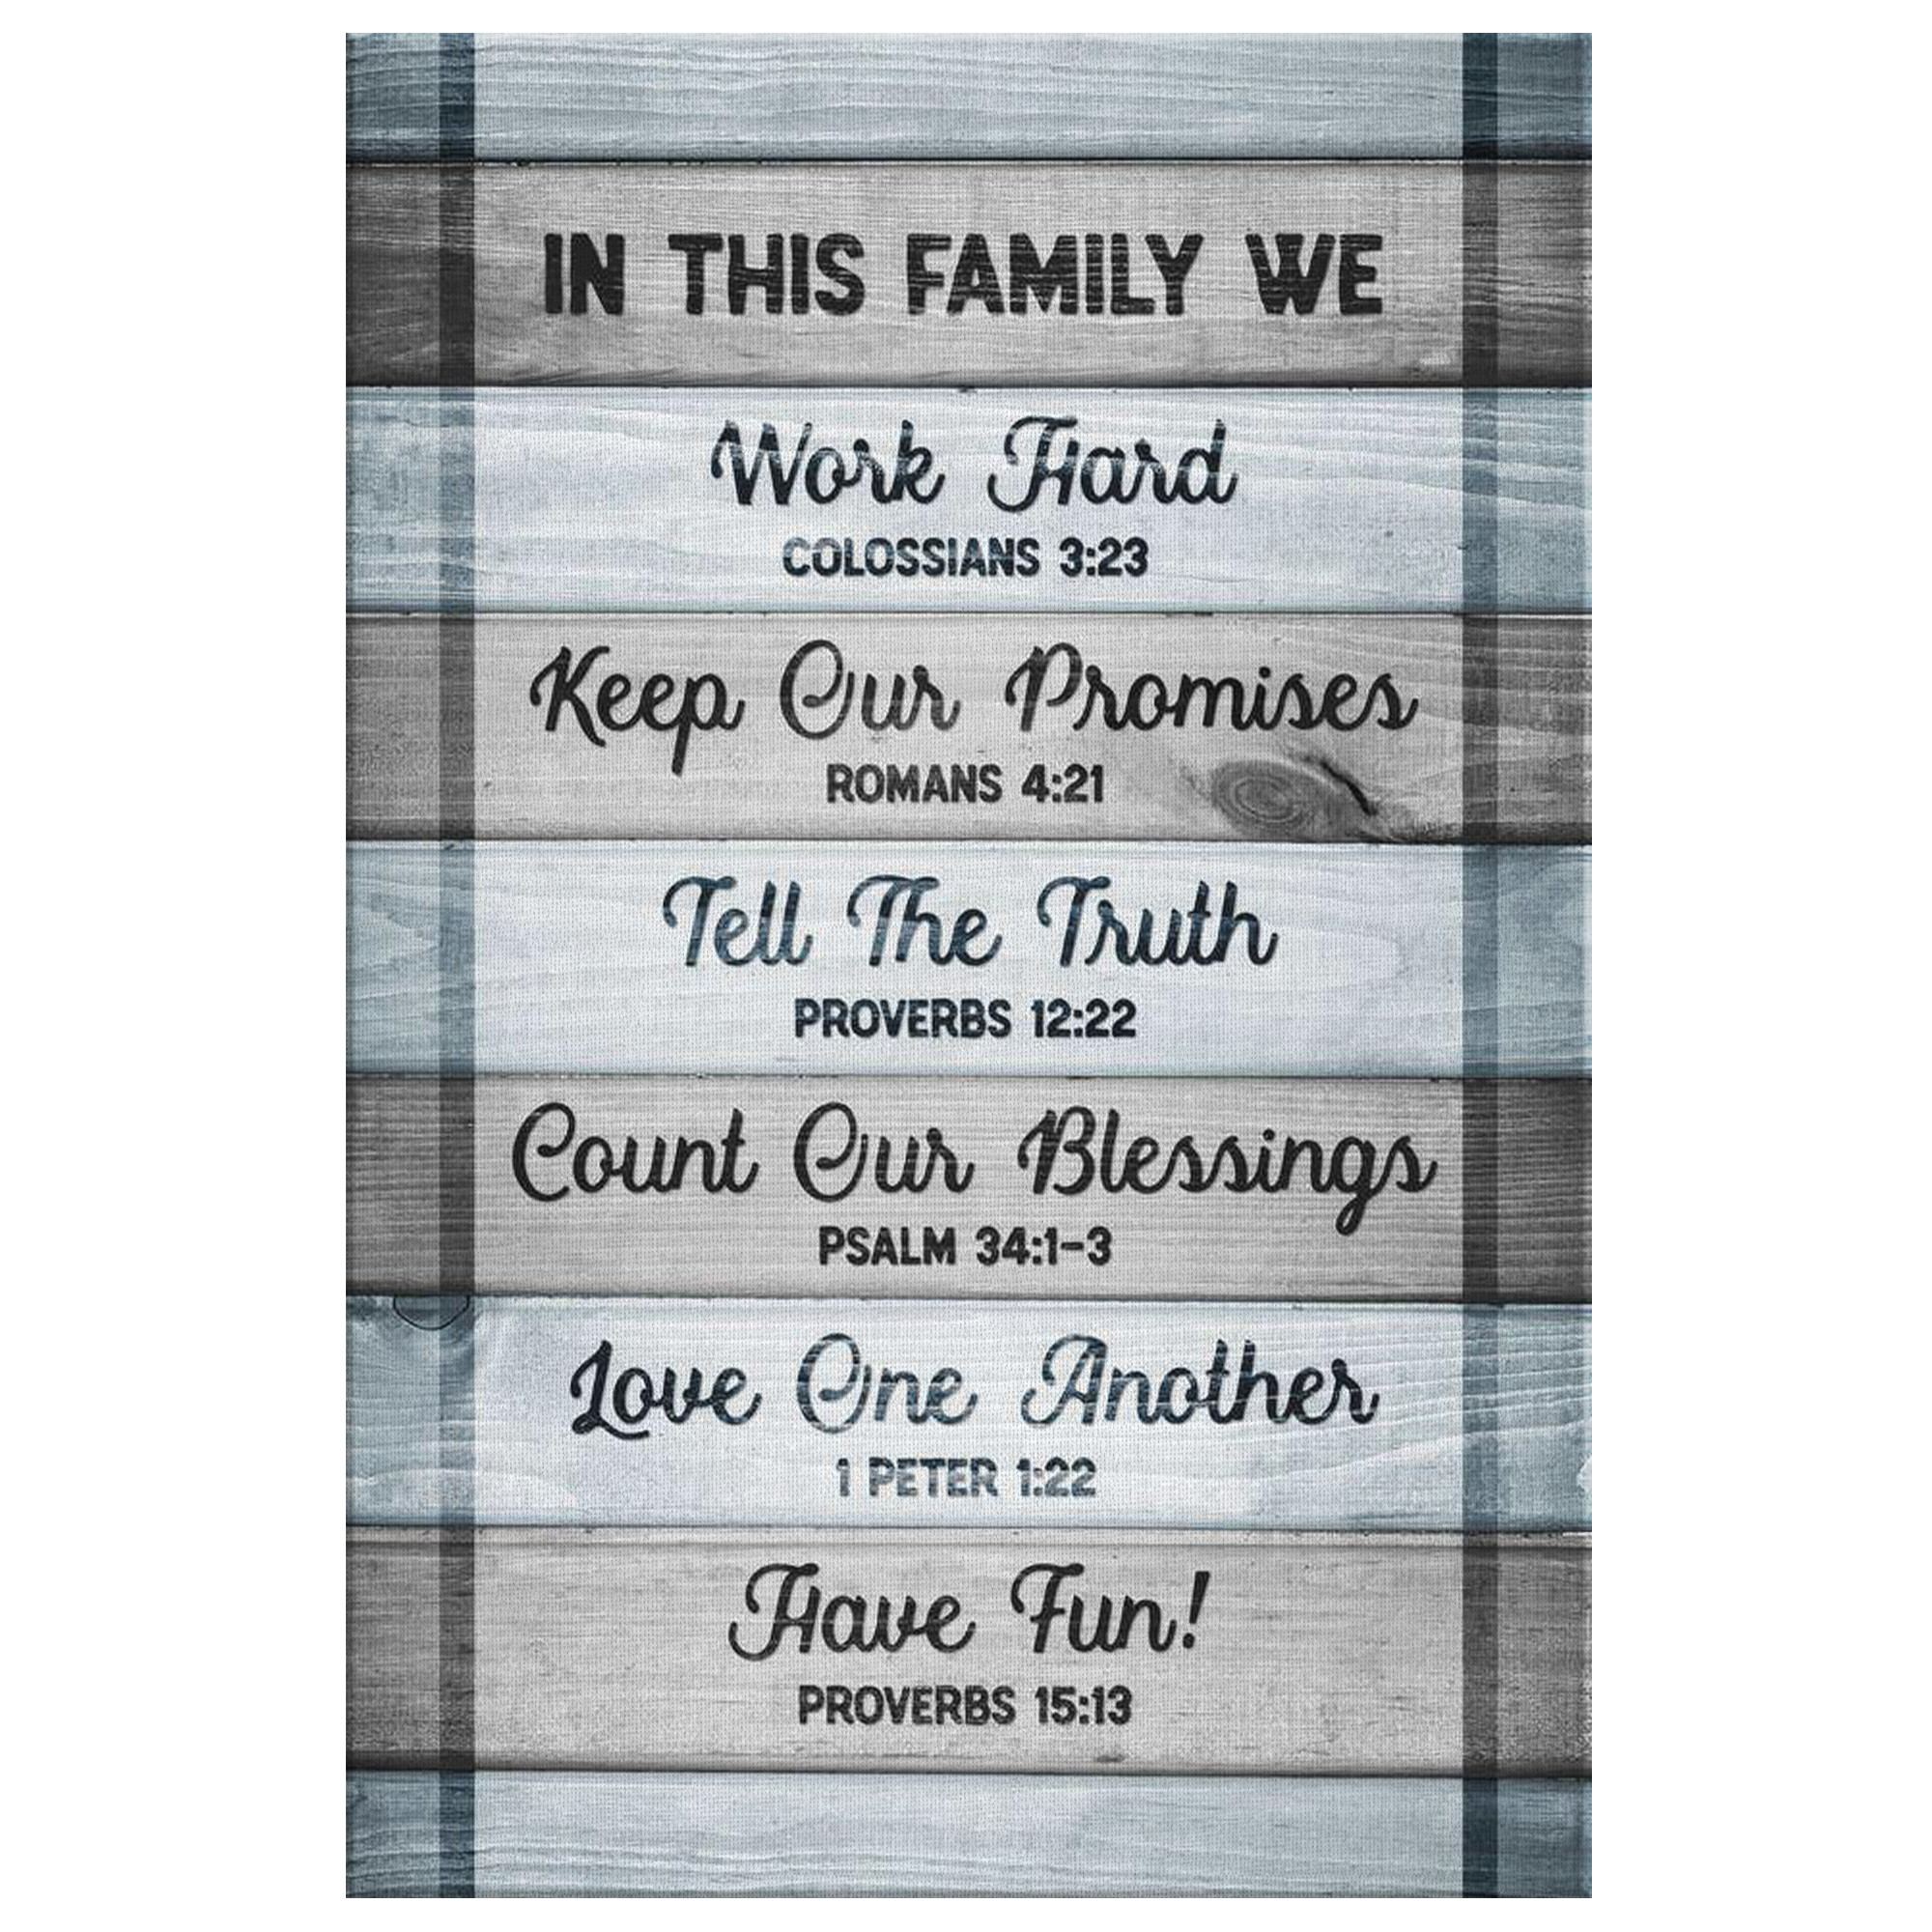 Quote From The Bible About Family
 "In this Family Bible Quotes" Premium Canvas GearDen